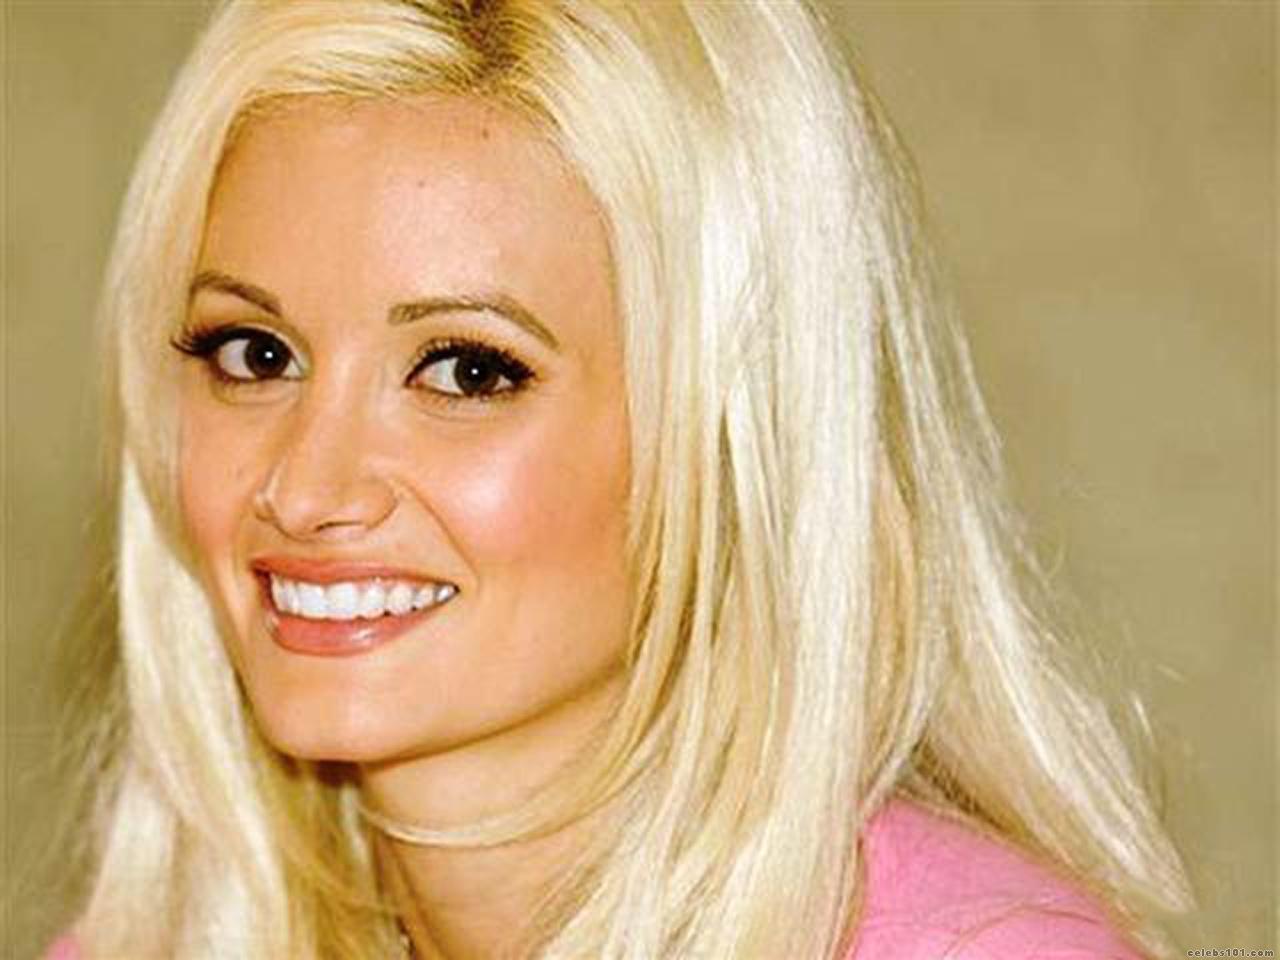 Holly Madison High quality wallpaper size 1280x960 of Holly Madison 1280x960